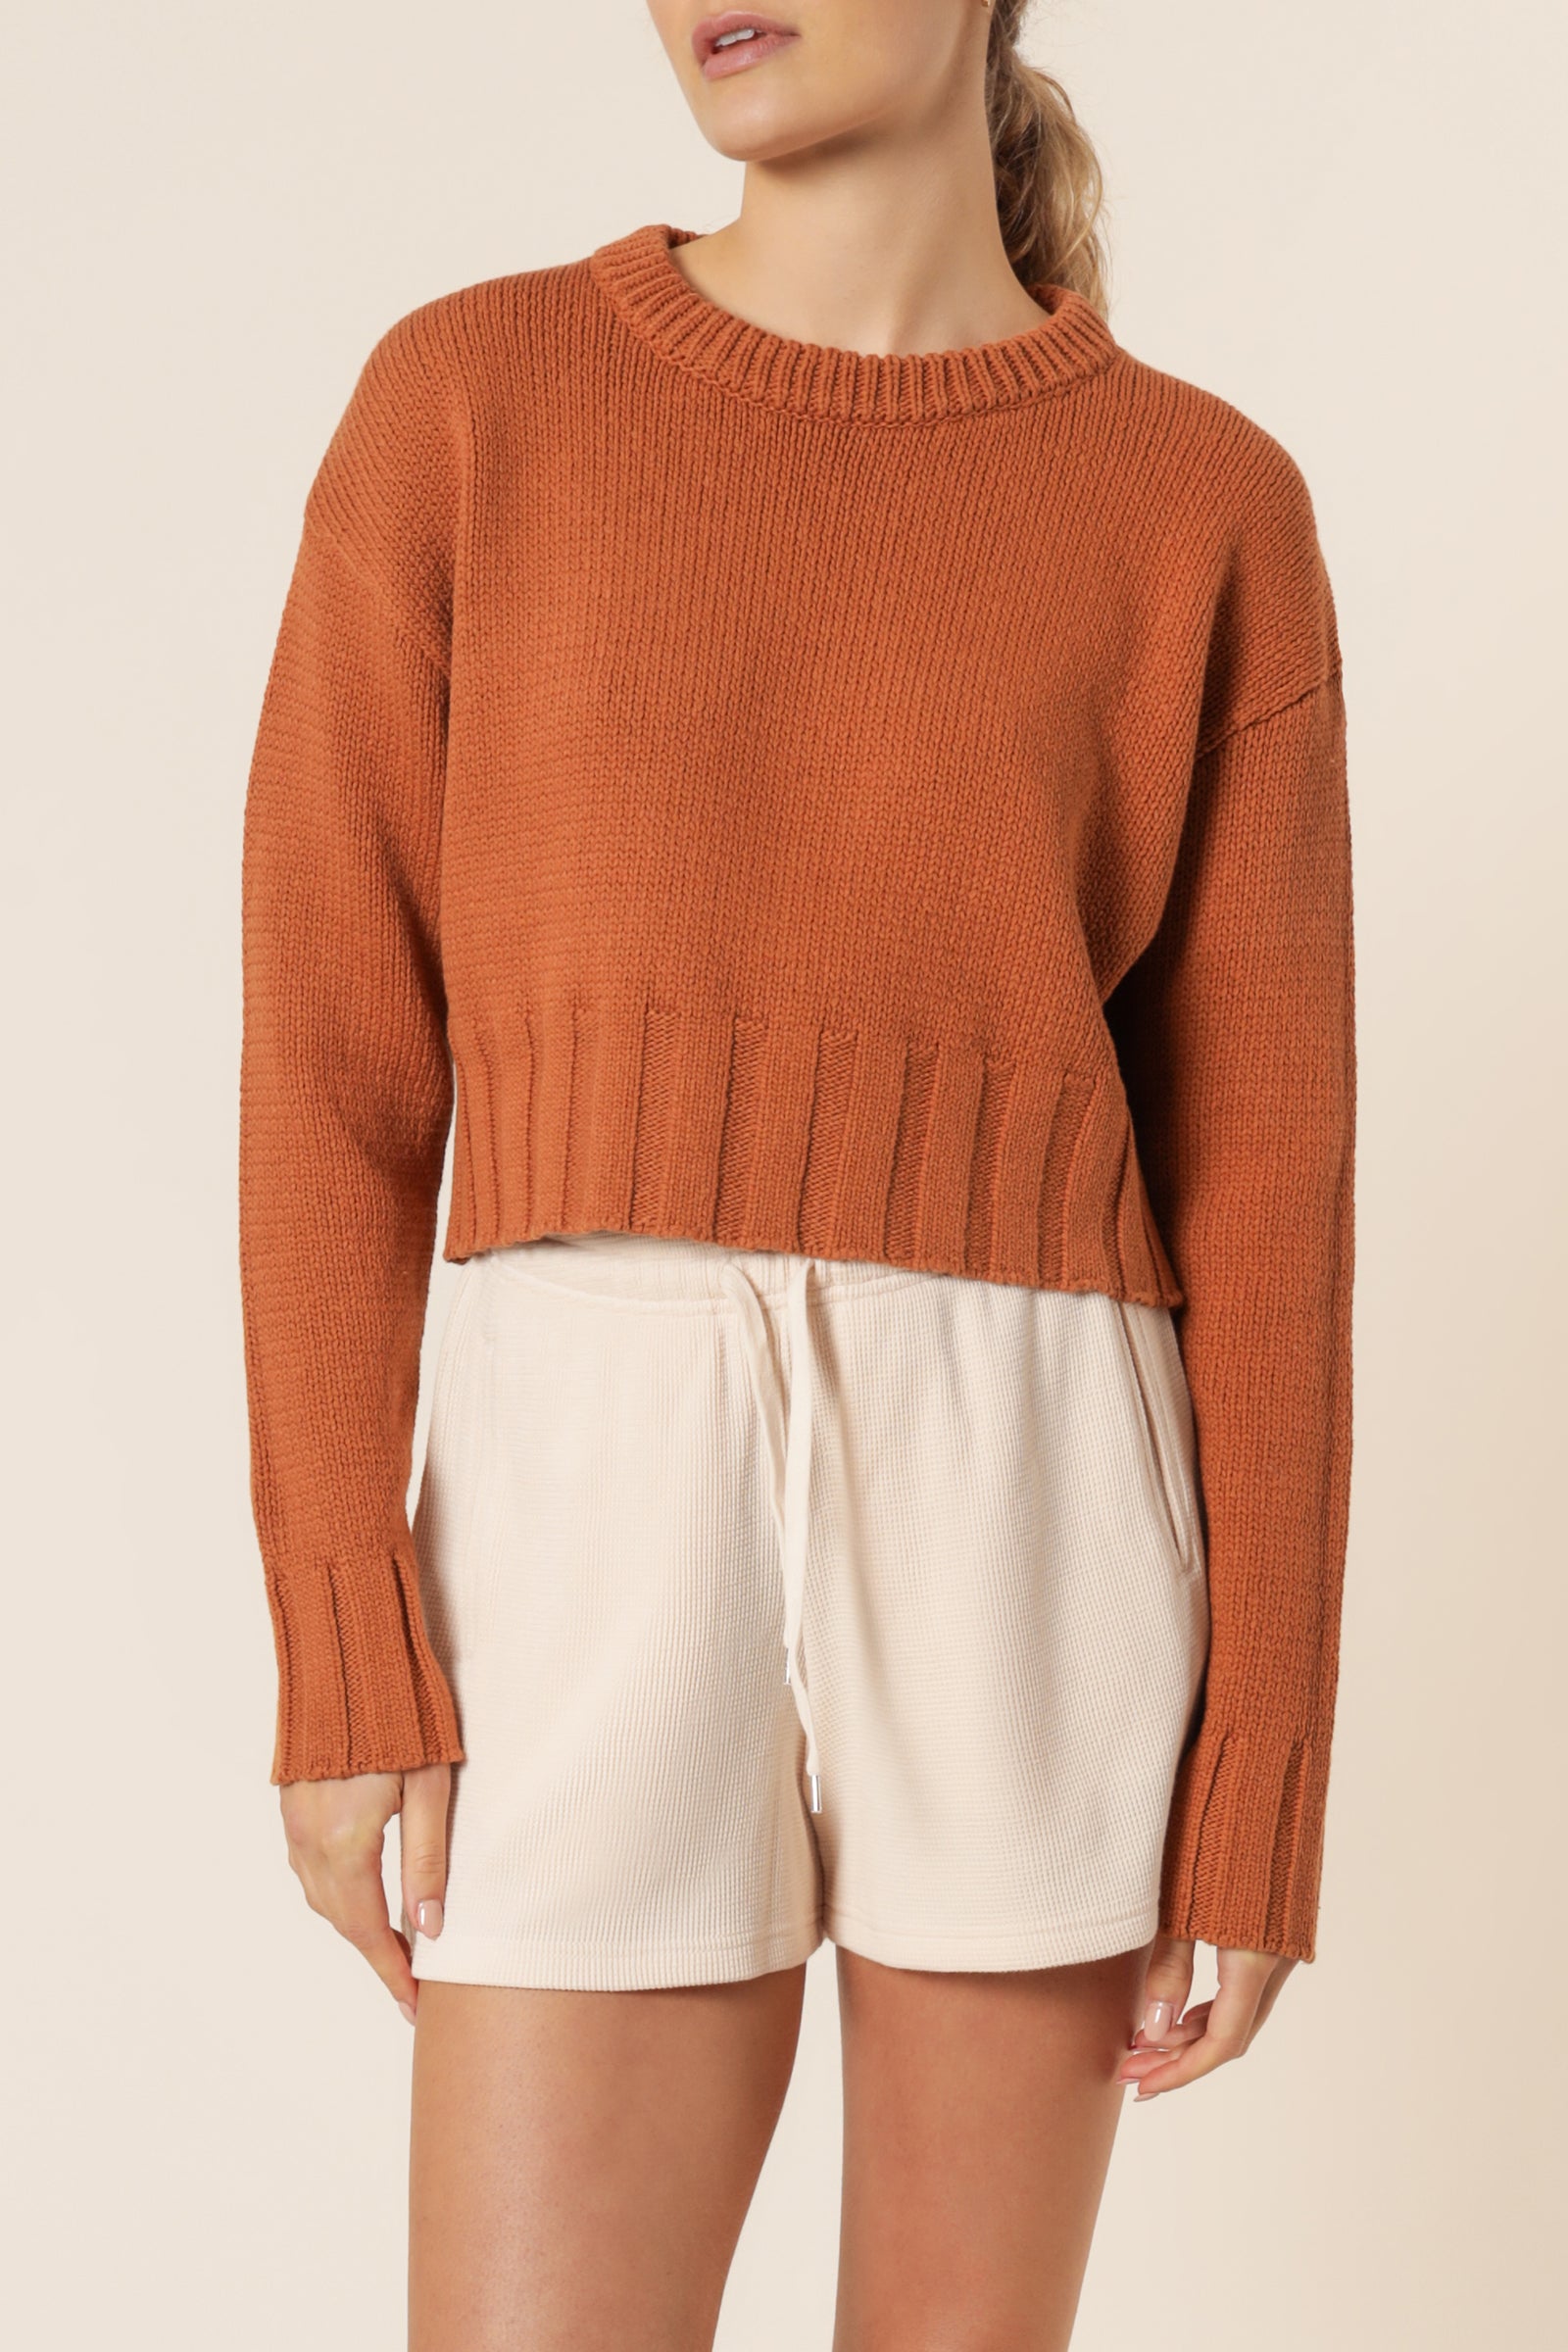 Nude Lucy rory knit jumper brick knits